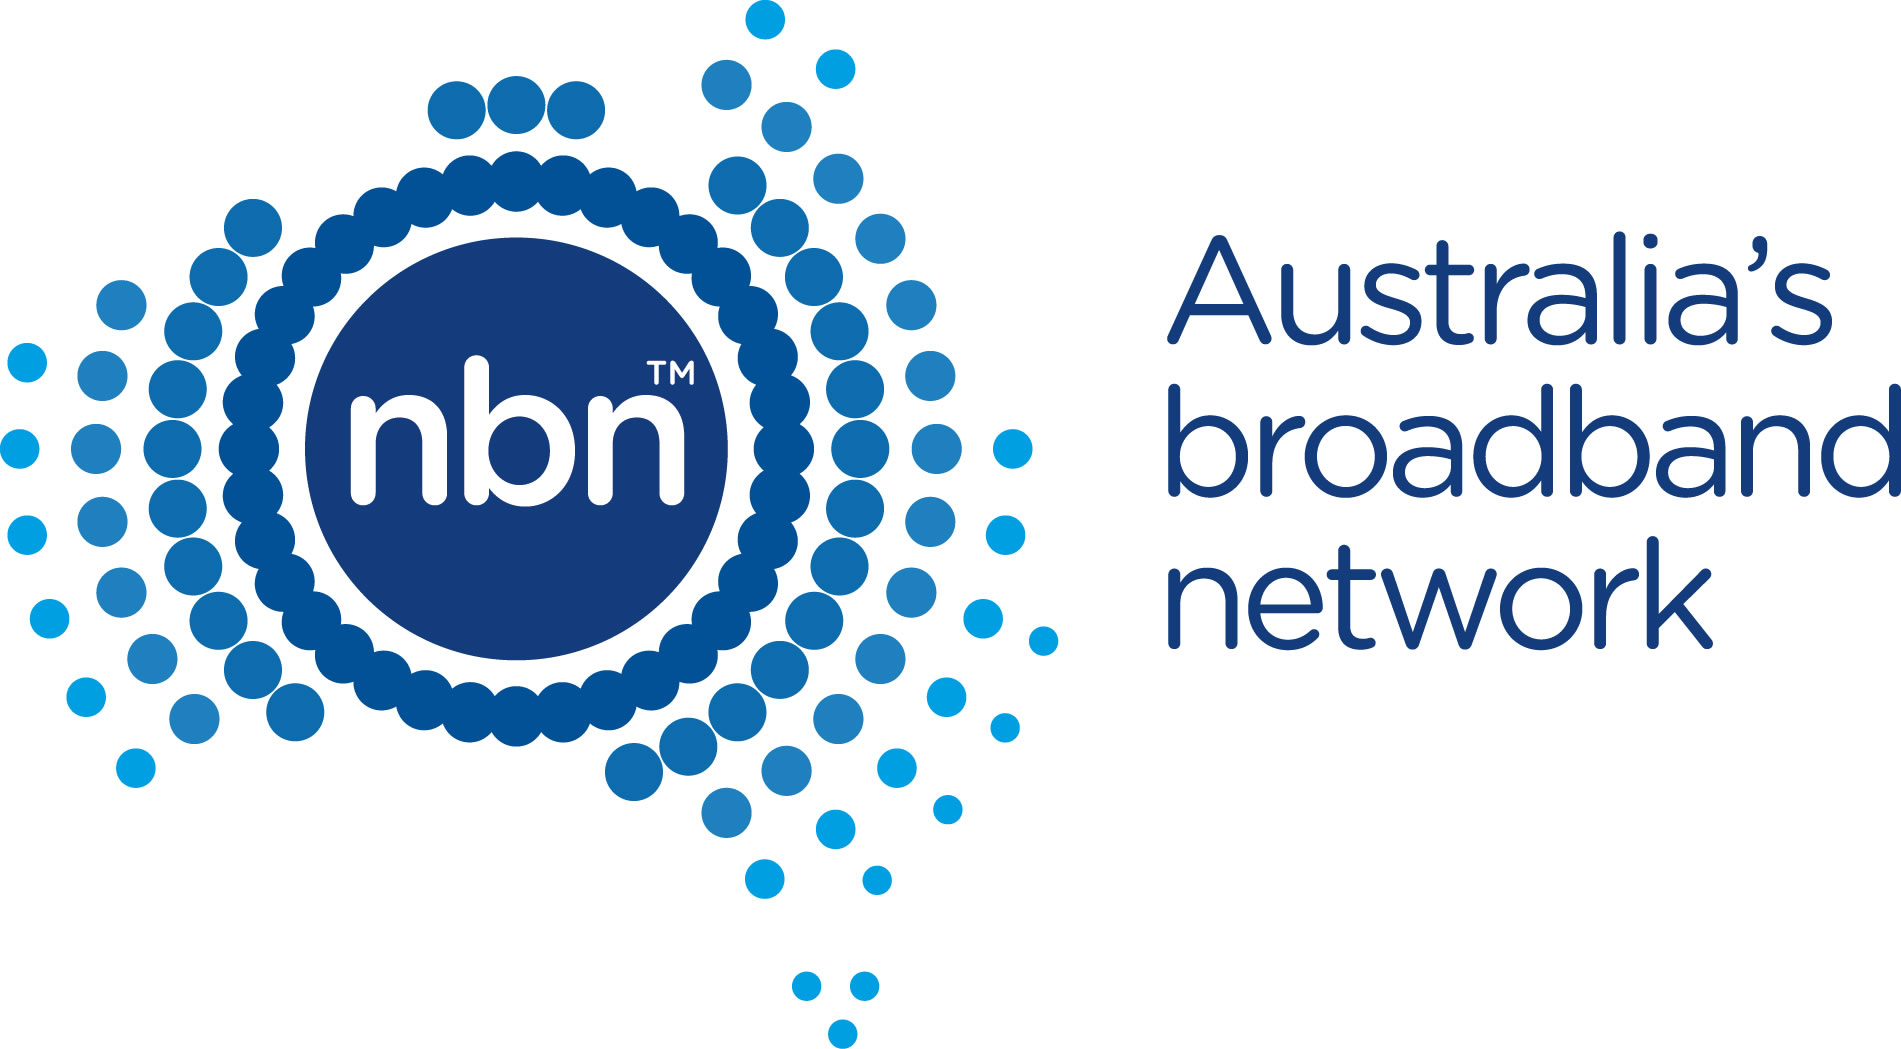 Two things all FiftyUps should know about the NBN